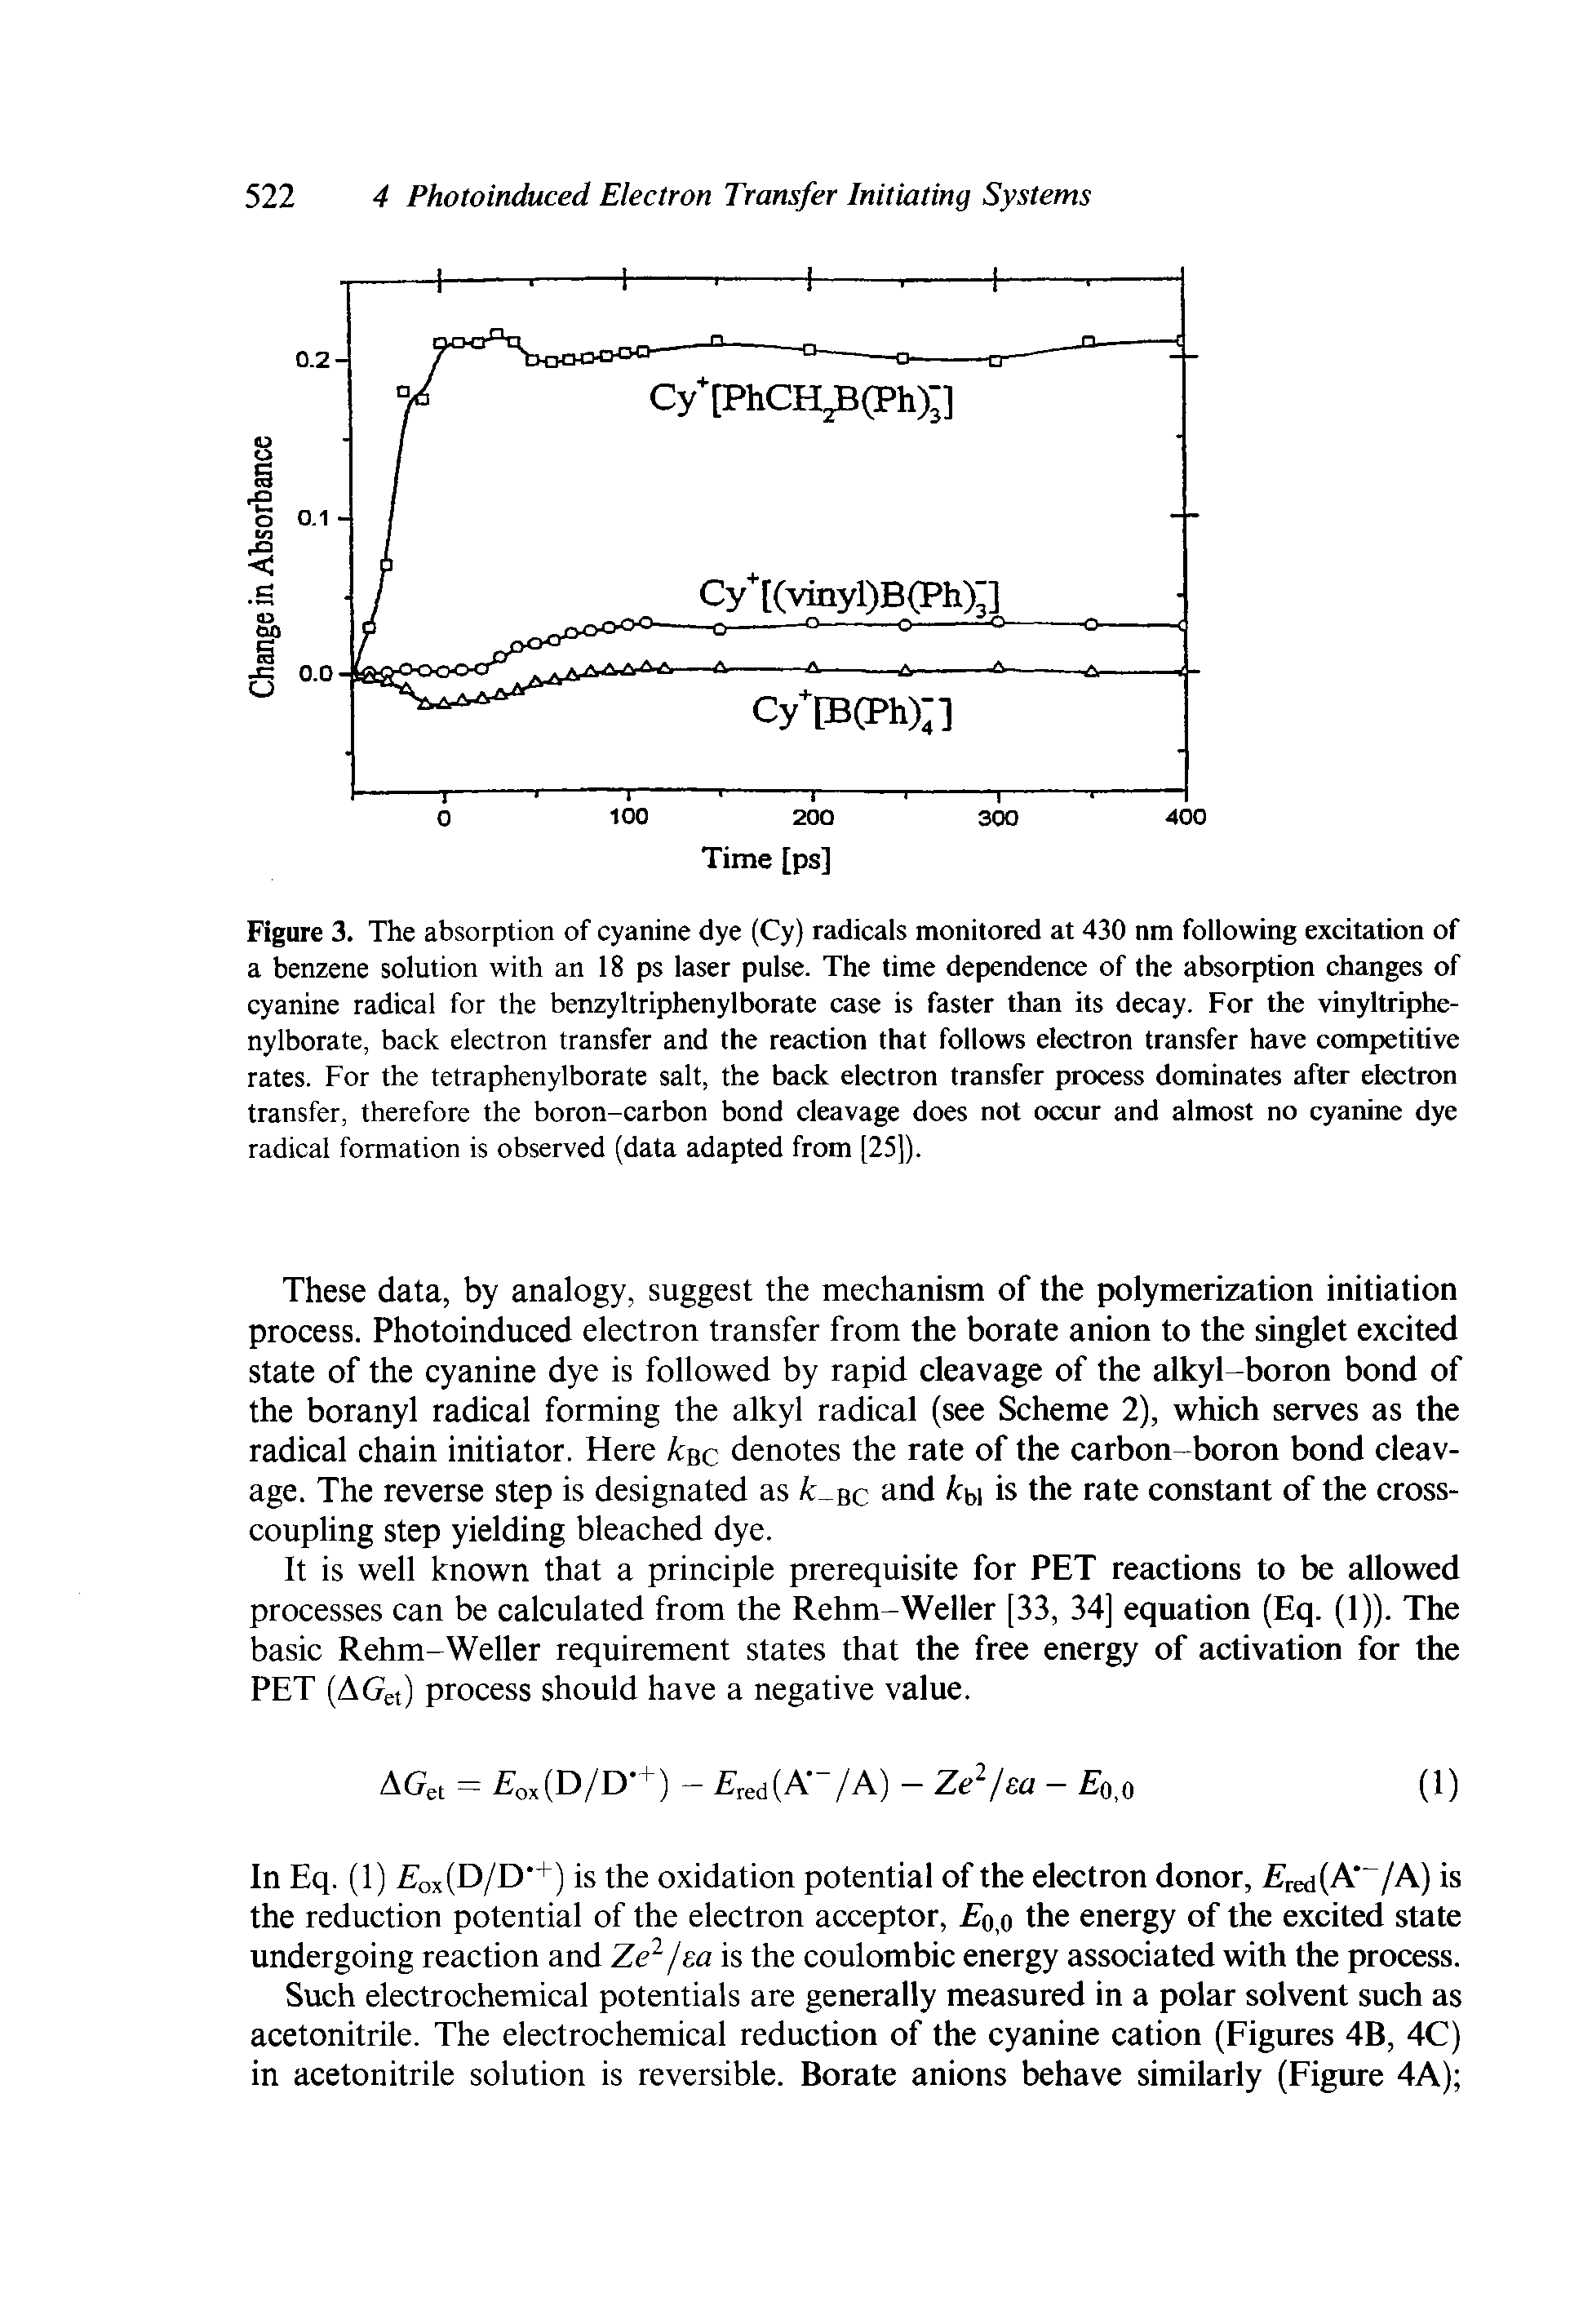 Figure 3. The absorption of cyanine dye (Cy) radicals monitored at 430 nm following excitation of a benzene solution with an 18 ps laser pulse. The time dependence of the absorption changes of cyanine radical for the benzyltriphenylborate case is faster than its decay. For the vinyltriphe-nylborate, back electron transfer and the reaction that follows electron transfer have competitive rates. For the tetraphenylborate salt, the back electron transfer process dominates after electron transfer, therefore the boron-carbon bond cleavage does not occur and almost no cyanine dye radical formation is observed (data adapted from [25]).